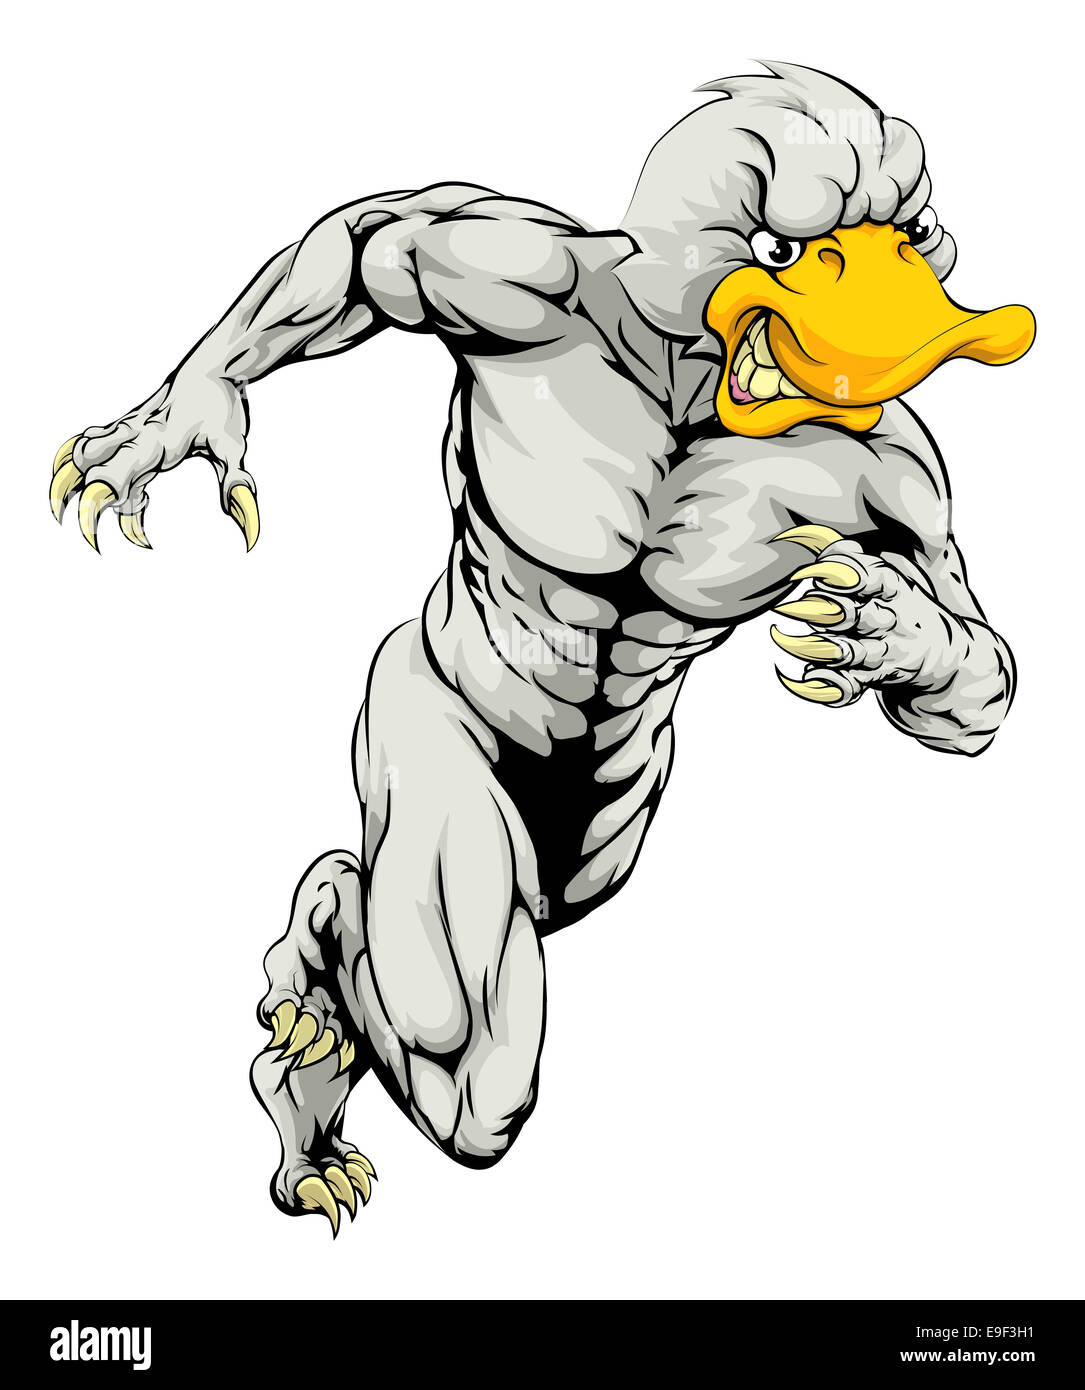 An illustration of a mean tough looking duck sports mascot sprinting Stock Photo